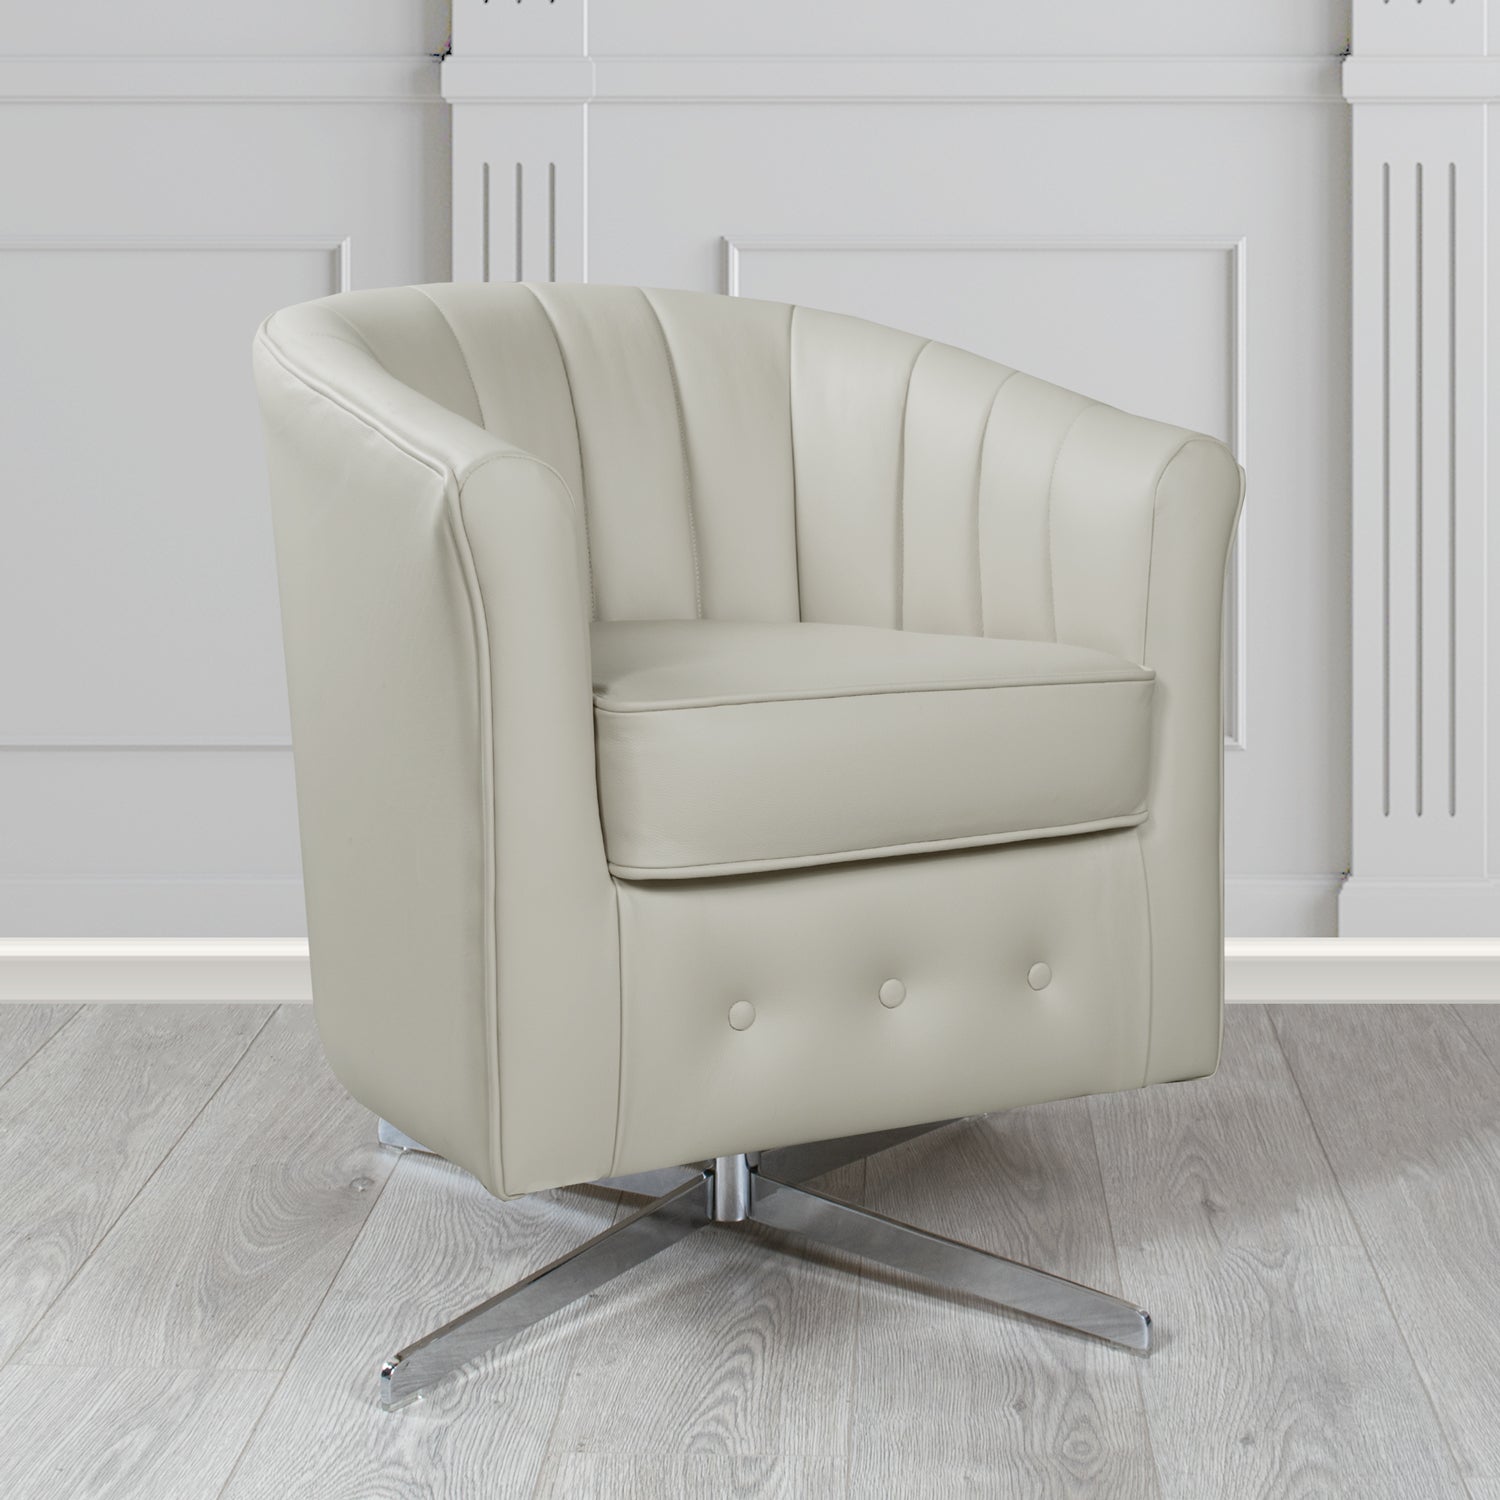 Doha Swivel Tub Chair in Vele Vapour Genuine Leather